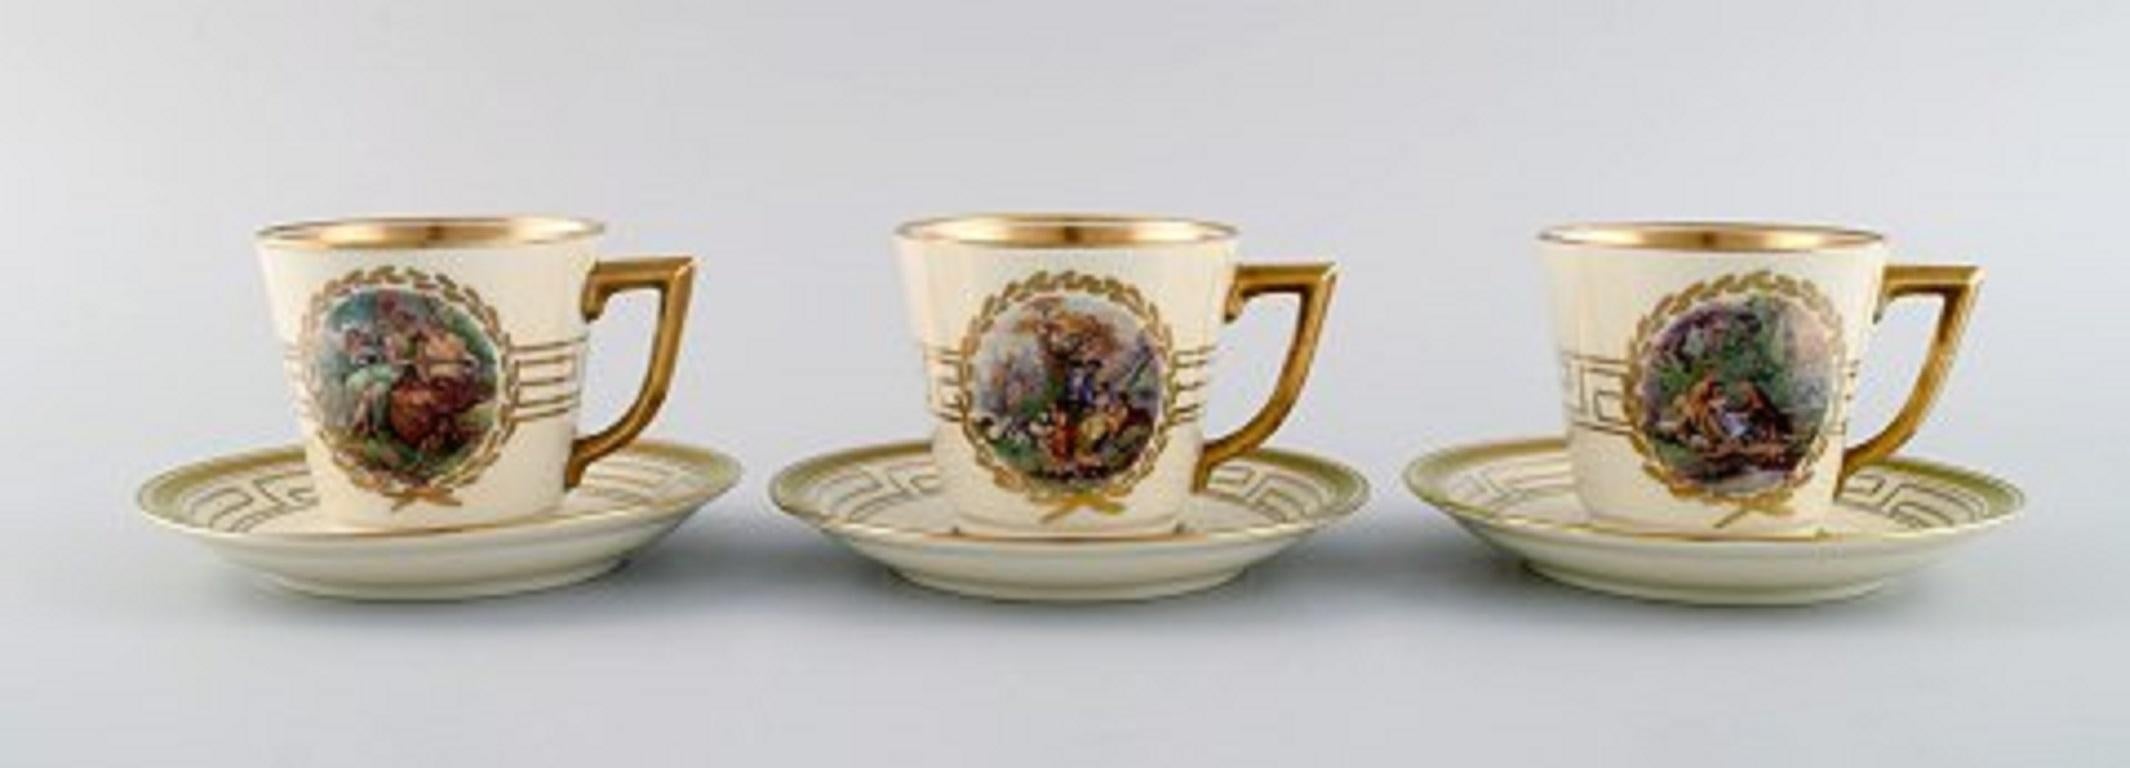 Royal Copenhagen Coffee Service for 10 People in Porcelain with Romantic Scenes 1